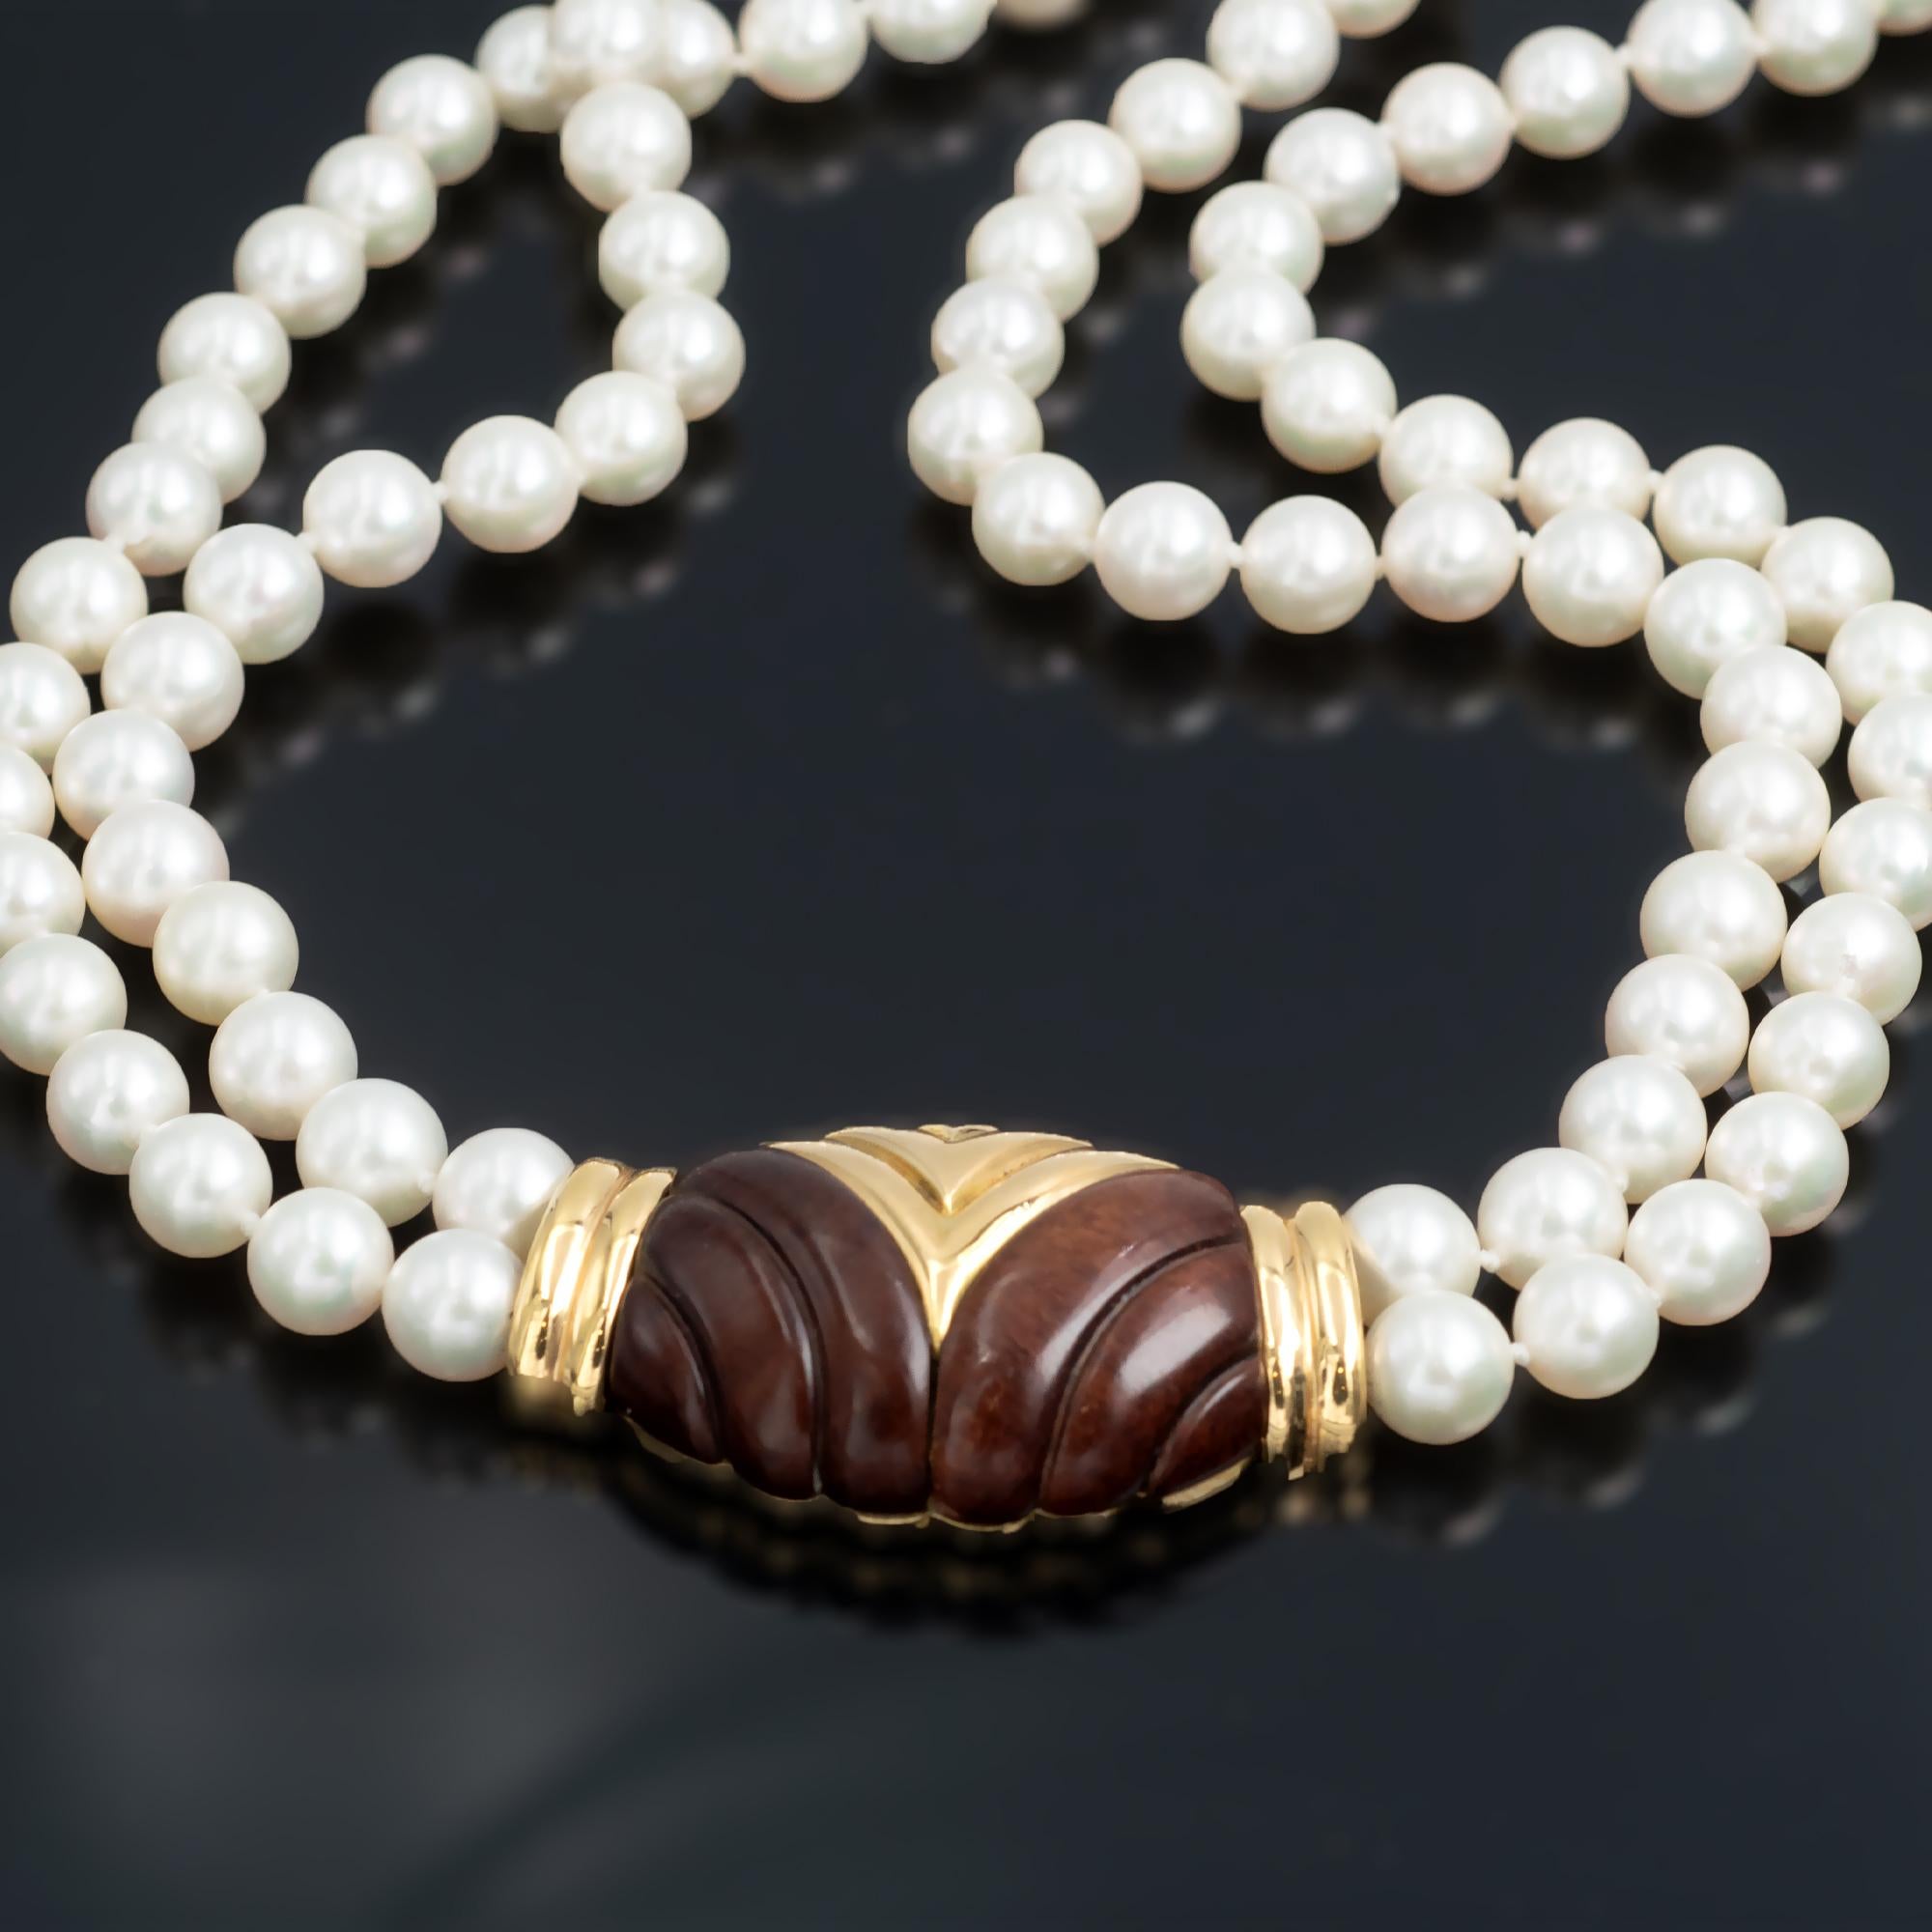 Exquisite choker necklace. Two rows of top Japanese white pearls ( 7-7.5mm) with, in their midst a carved wood and 18 Karat solid gold element. A modern pattern runs across wood and gold seamlessly.   Excellent make. 
this necklace bears the 18kt